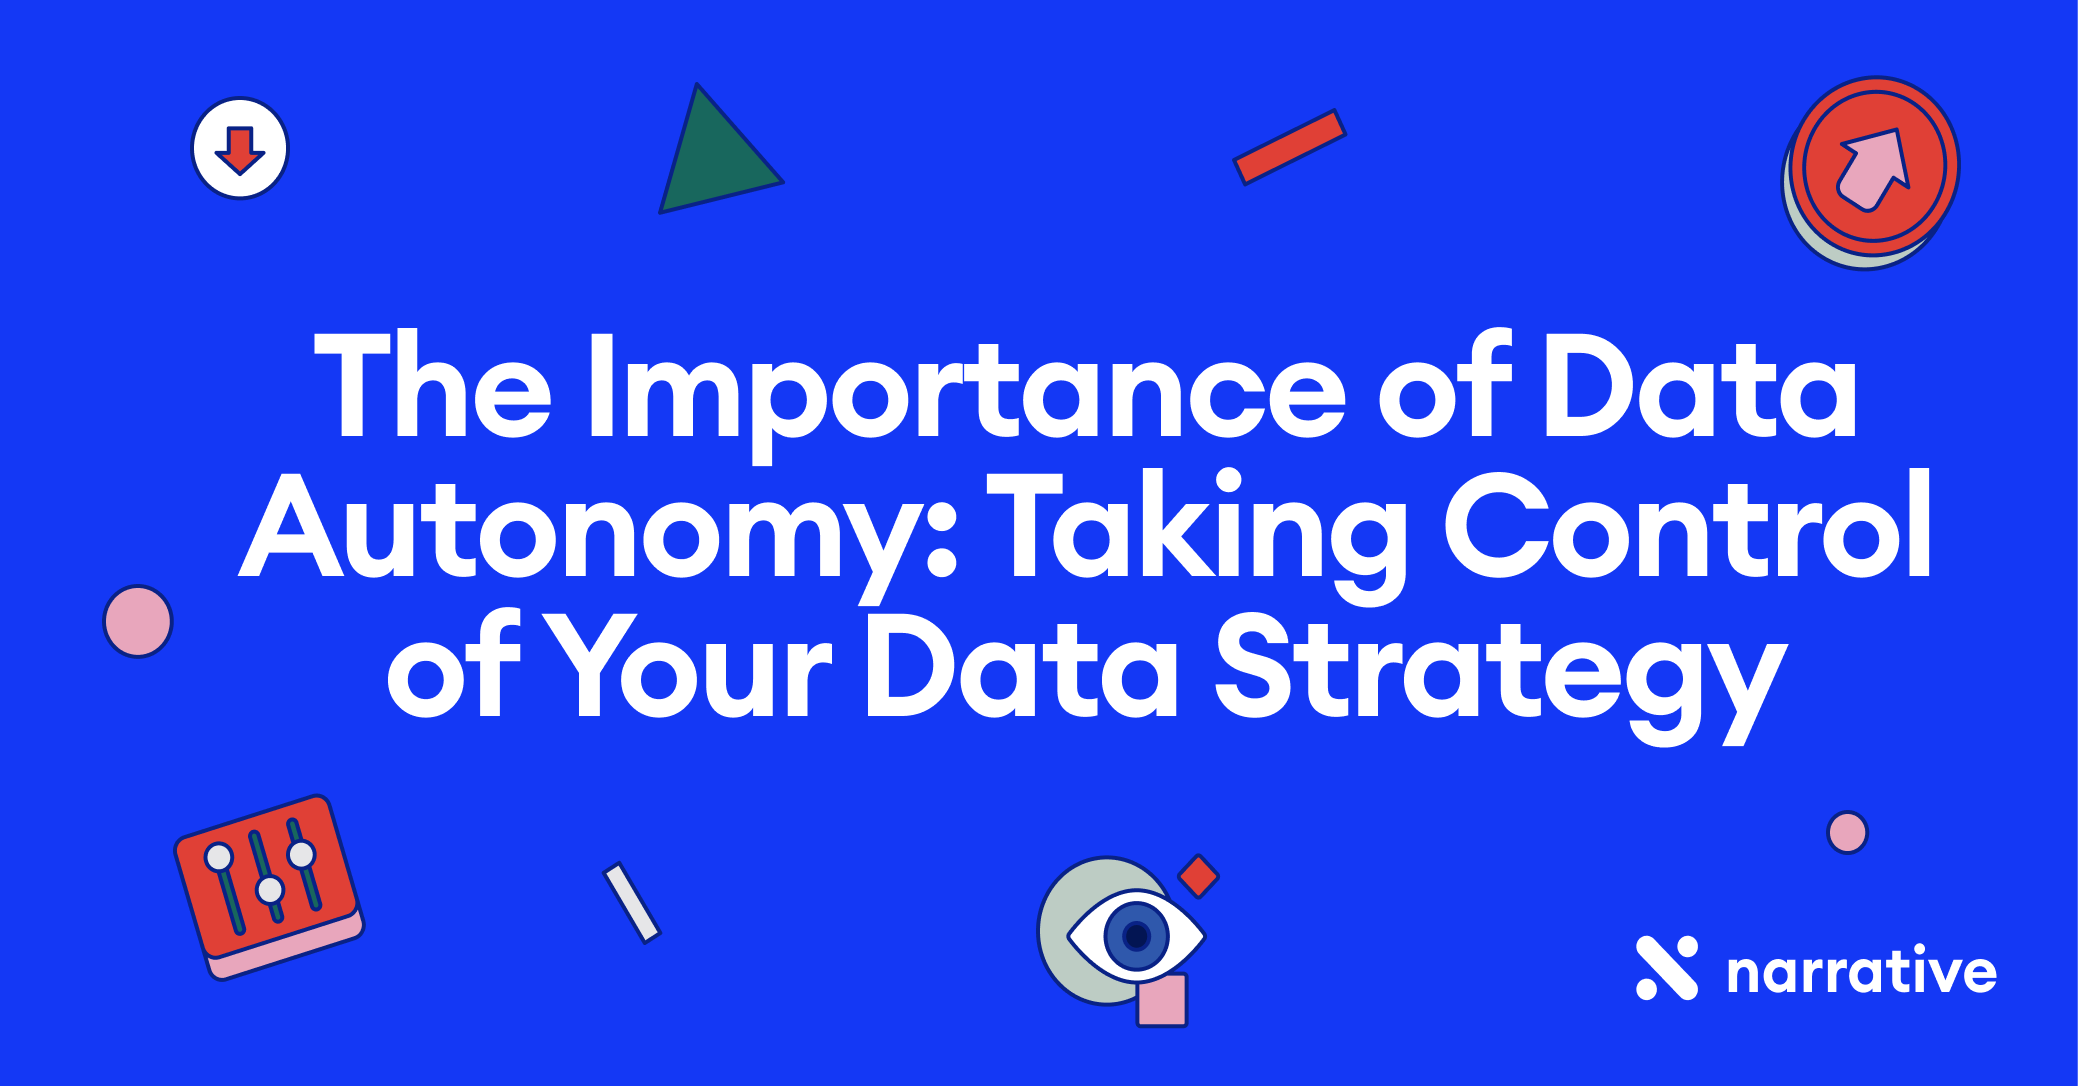 The Importance of Data Autonomy: Taking Control of Your Data Strategy